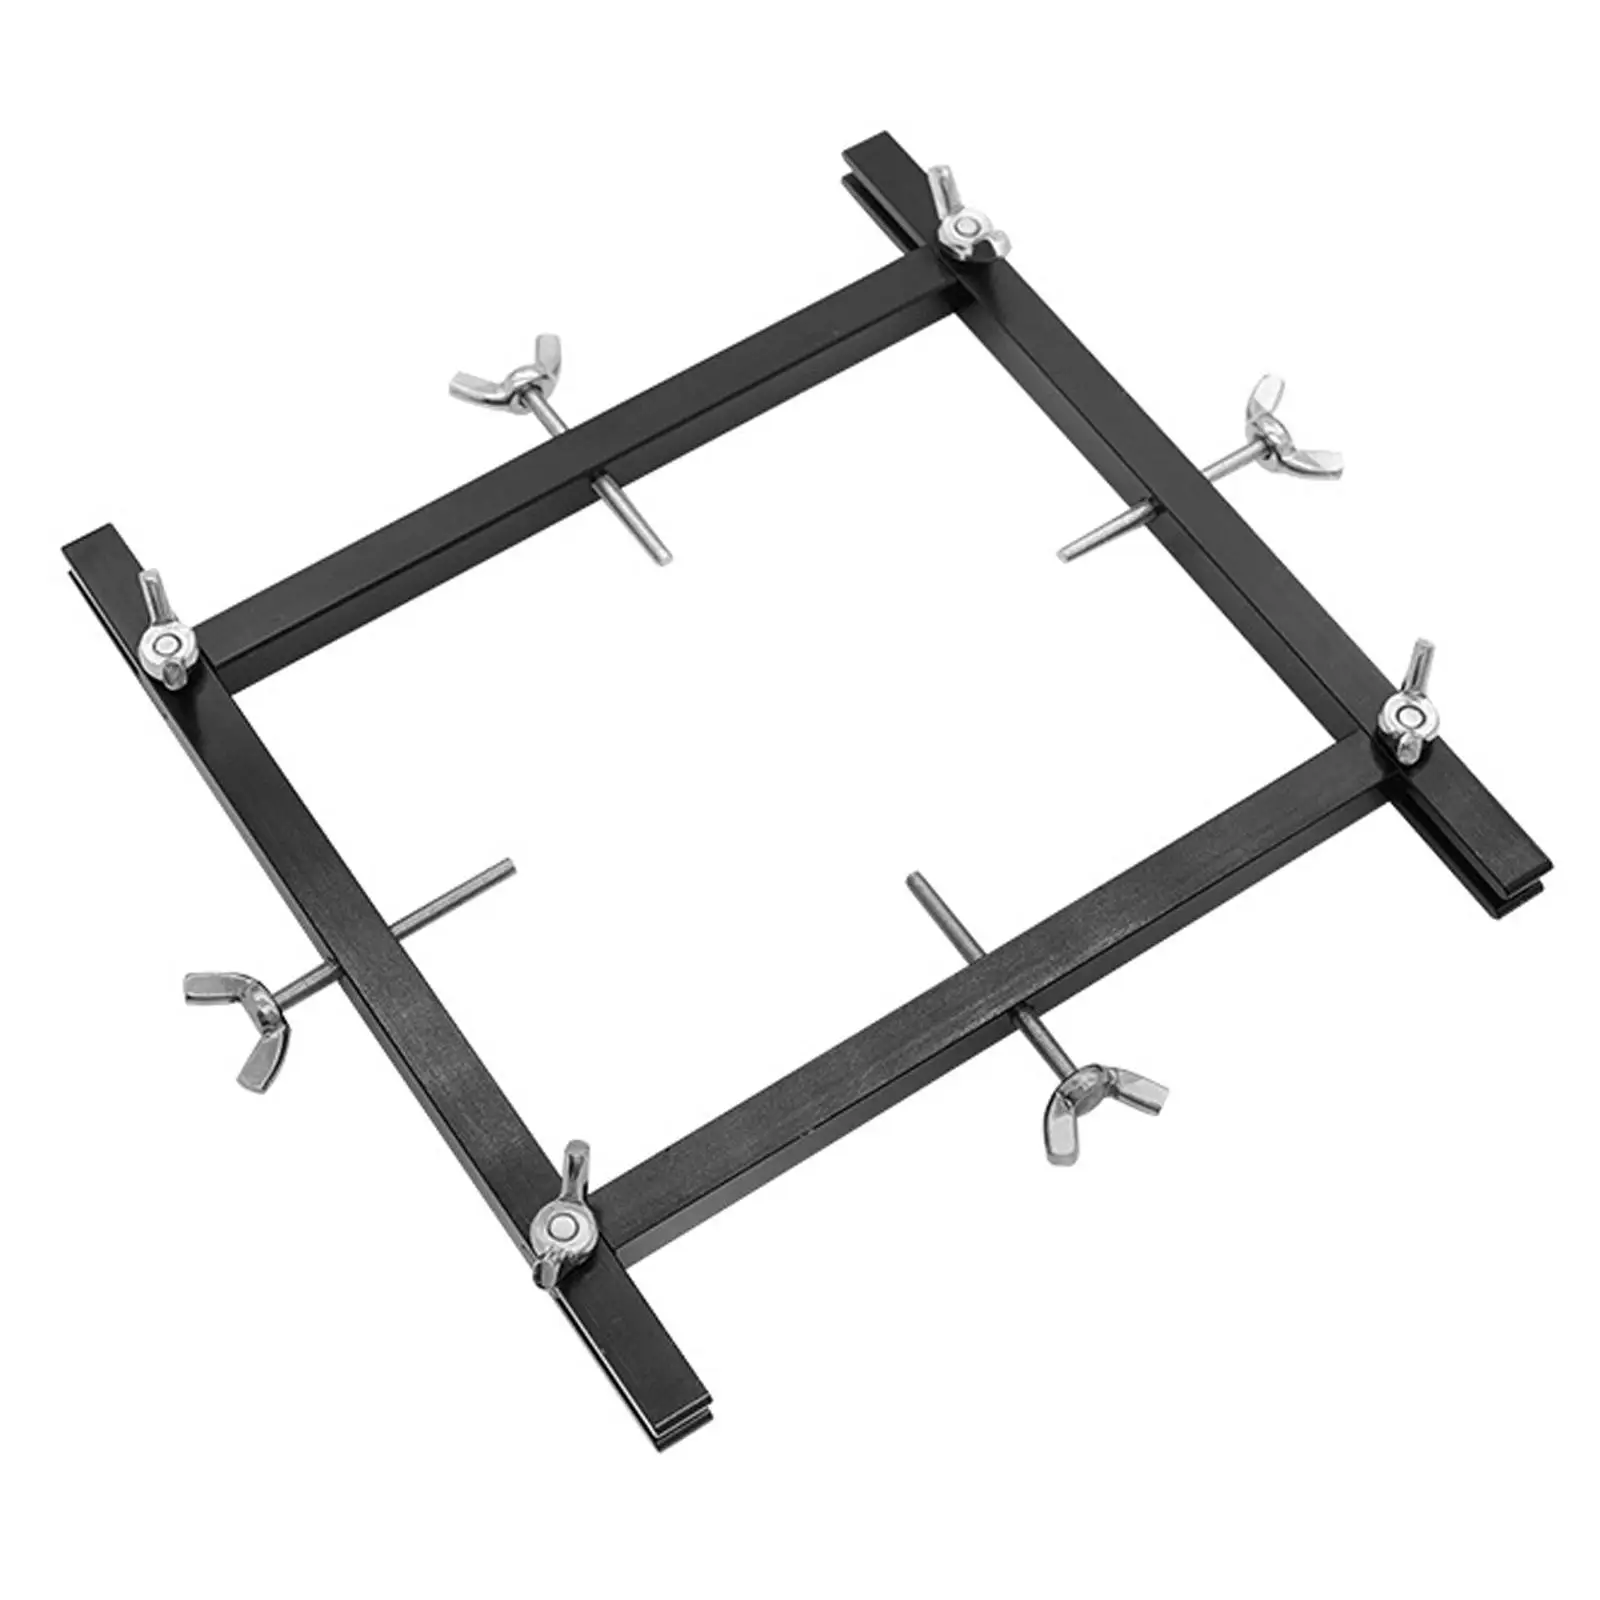 Hot Tent Stove Jack Square Adjustable Chimney Holder for Outdoor BBQ Camping